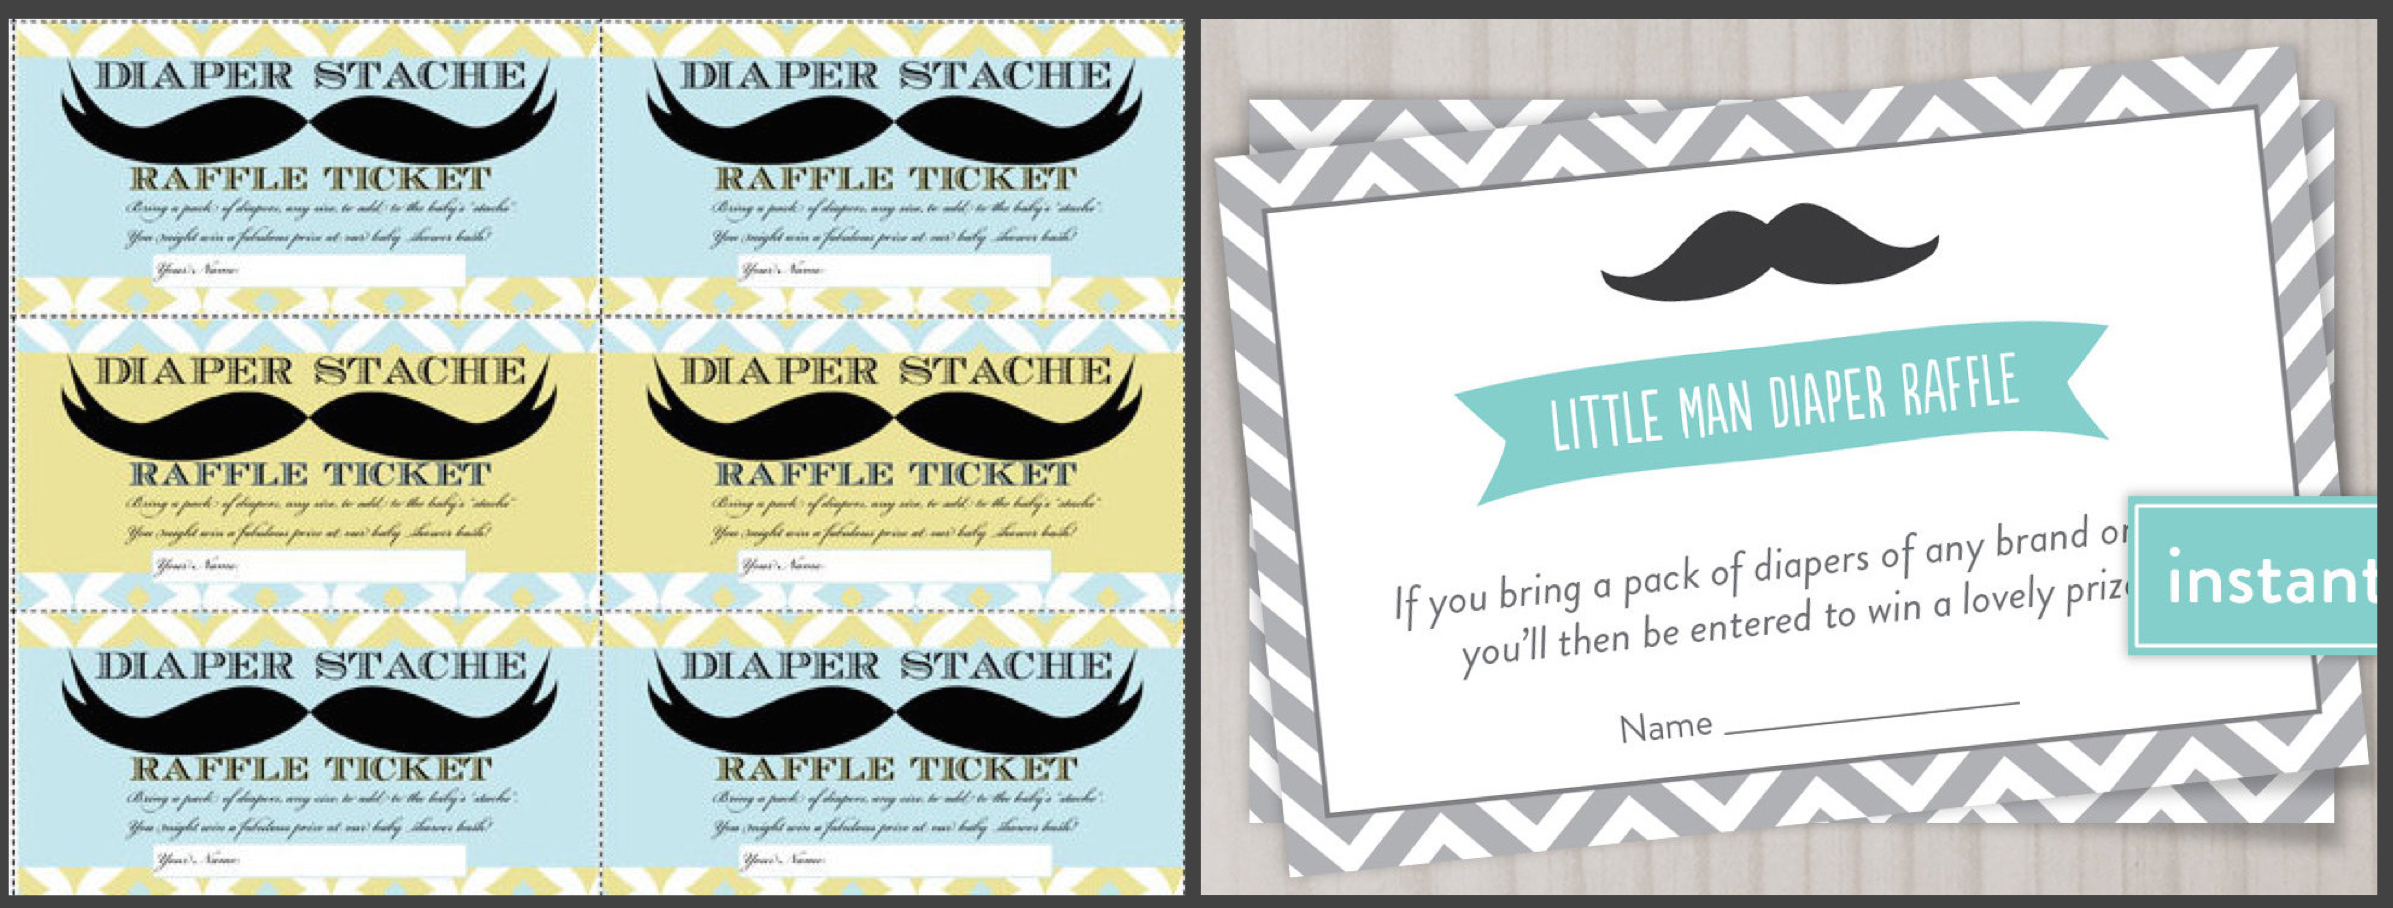 Printable Mustache Bash Game | Baby Shower Ideas | Partyideapros - Name That Mustache Game Printable Free